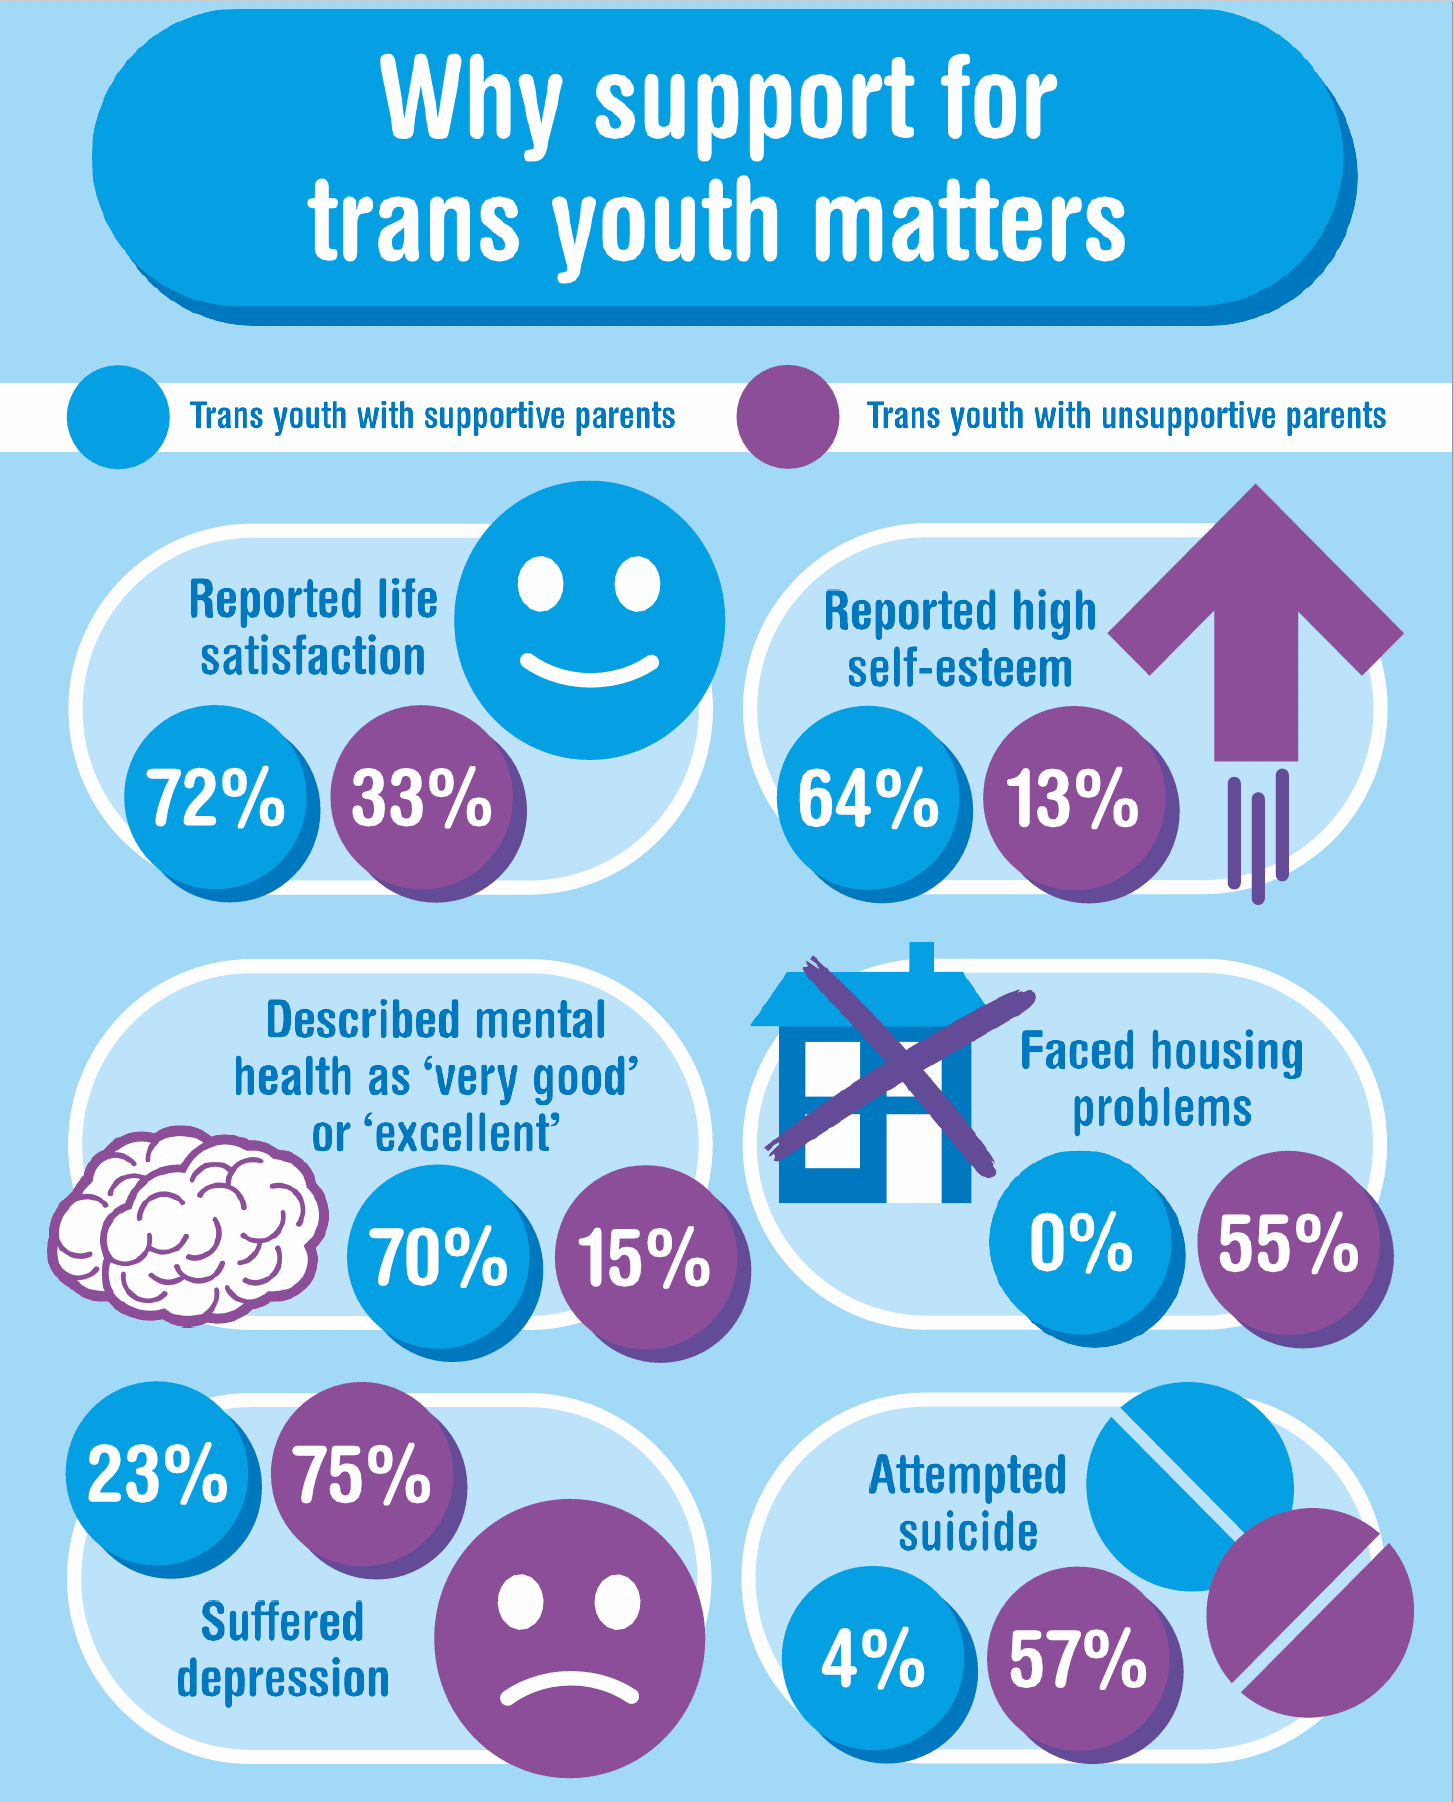 This is an infographic which covers the entire page.  It is titled Why Support for Trans Youth Matters at the centre top of the page.  It reports the information from a research study.

Below the title there is a blue circle with the words Trans Youth with Supportive Parents and a purple circle with the words Trans Youth with Unsupportive Parents.  Below the title there are six graphics set out in two columns across the page.  Each graphic has a title and information set out in a blue and purple circle.

In the left hand column the top graphic says reported life satisfaction and there is a blue smiley face graphic.  The blue circle contains the number 72% and the purple circle contains the number 33%

In the left hand column the centre graphic says described mental health as very good or excellent and there is a graphic of a brain in white and outlined in purple.  The blue circle contains the number 70% and the purple circle contains the number 15%

In the left hand column the bottom graphic says suffered depression and there is a graphic of a sad face which is purple.  The blue circle contains the number 23% and the purple circle contains the number 75%.

In the right hand column the top graphic says reported high self-esteem and there is a graphic of a purple arrow pointing upwards.  The blue circle contains the number 64% and the purple circle contains the number 13%

In the right hand column the centre graphic says faced housing problems and there is a graphic of a blue house with white windows and door, there is a purple cross over the house.  The blue circle contains the number 0% and the purple circle contains the number 55%

In the right hand column the bottom graphic says attempted suicide and there is a graphic of two tablets one is purple and one is blue.  The blue circle contains the number 4% and the purple circle contains the number 57%.
